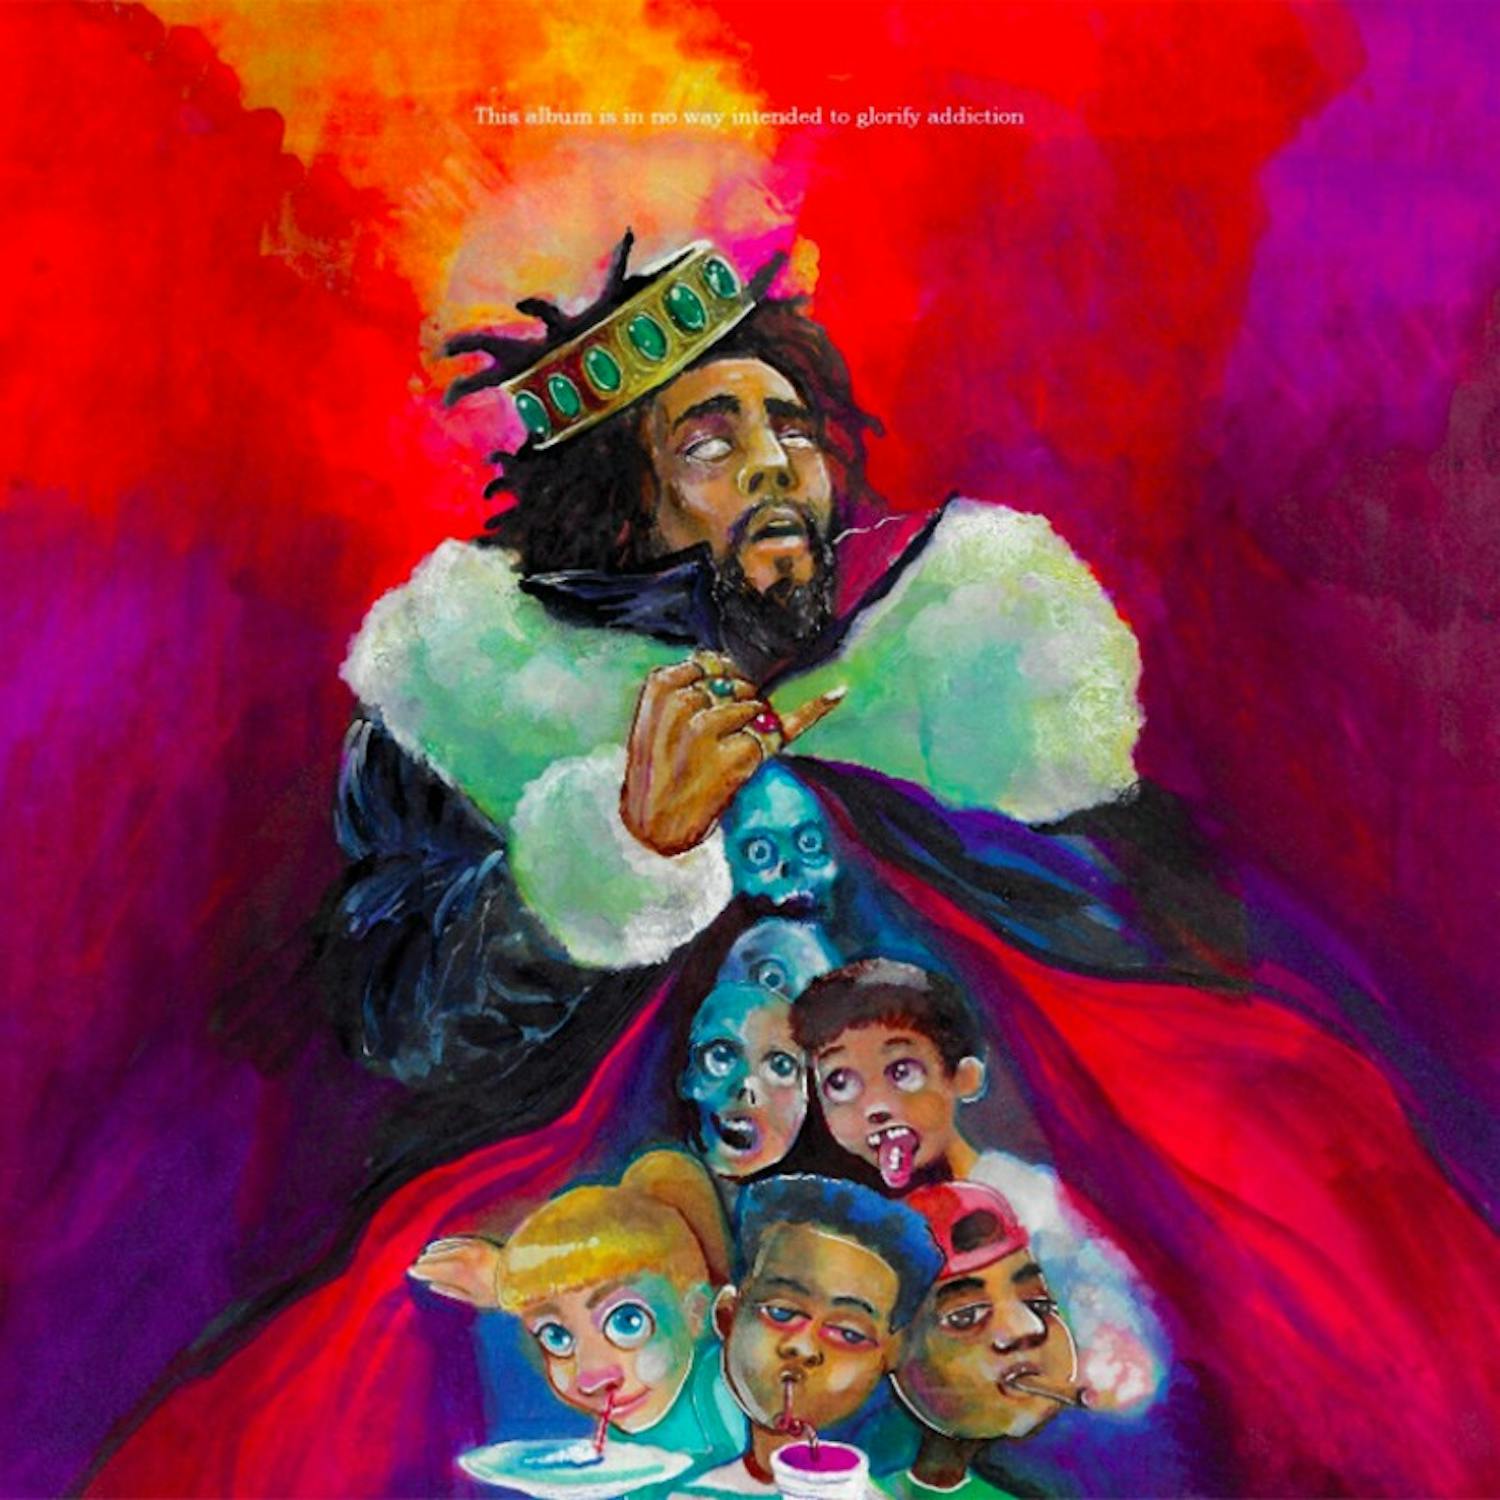 J. Cole's newest record discusses&nbsp;topics such as the weight of addiction and finding love through social media.